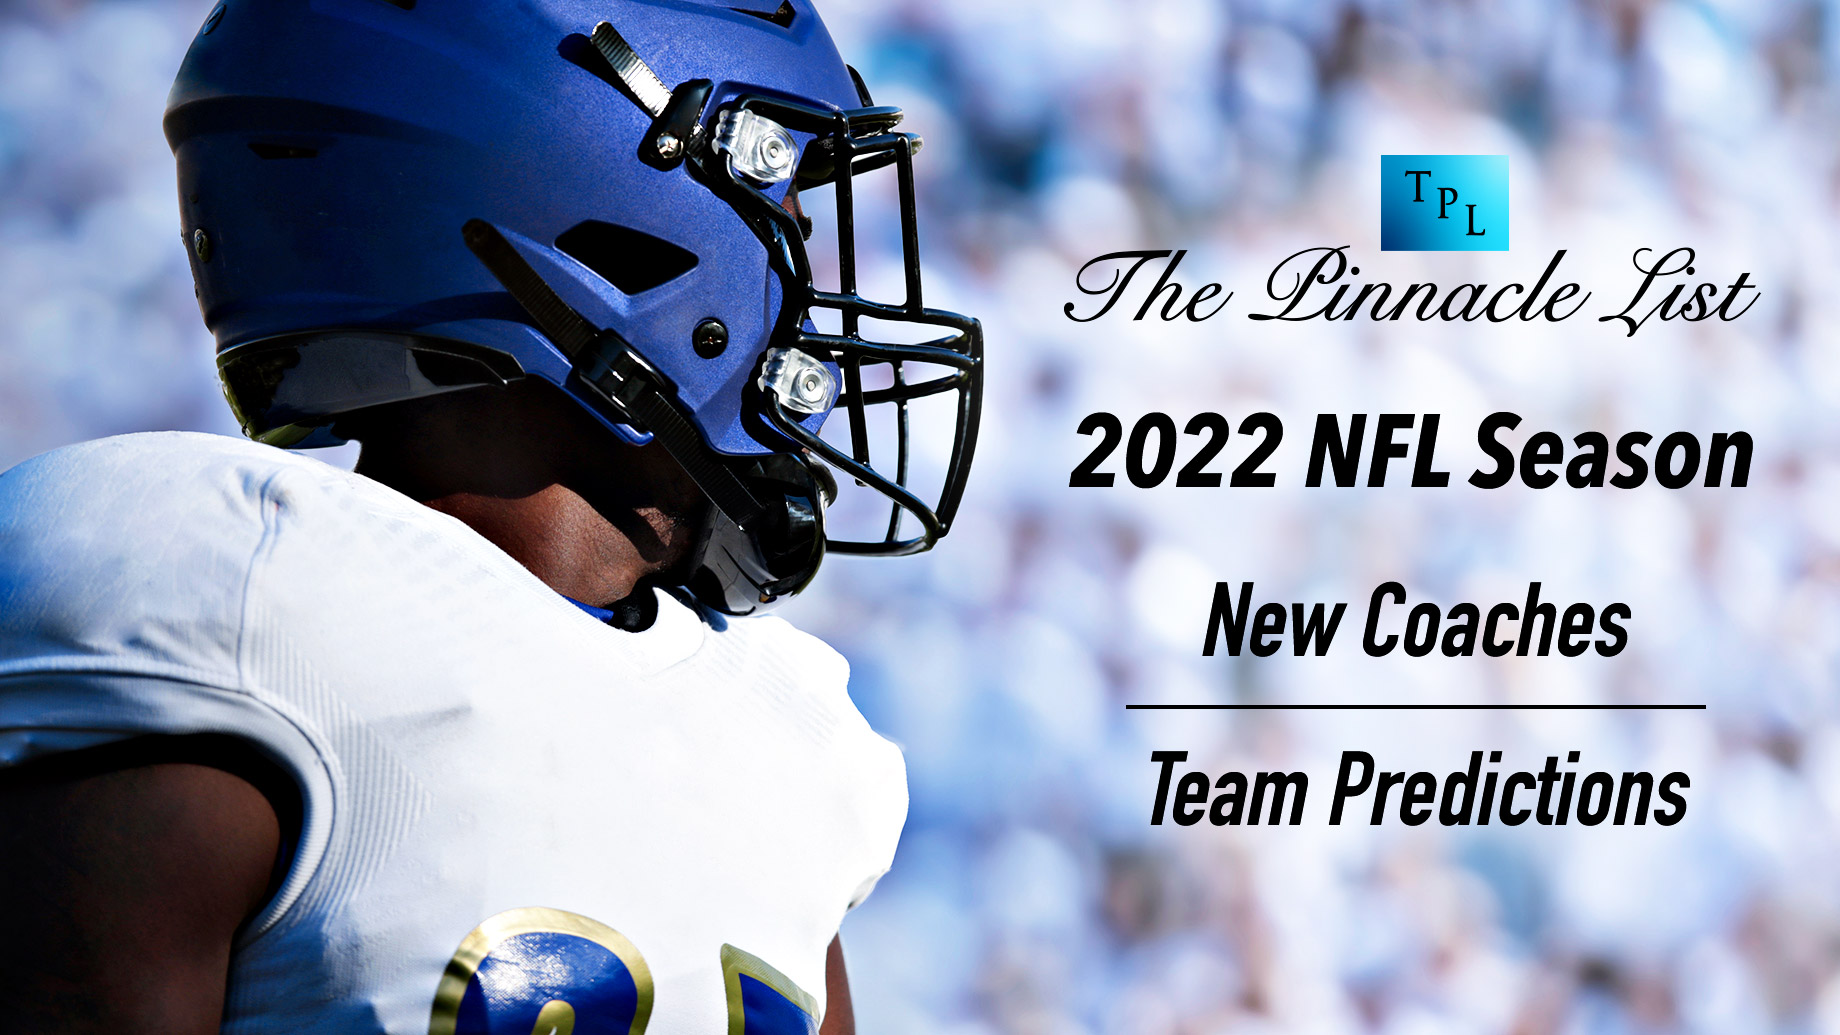 2022 NFL Season - New Coaches And Team Predictions